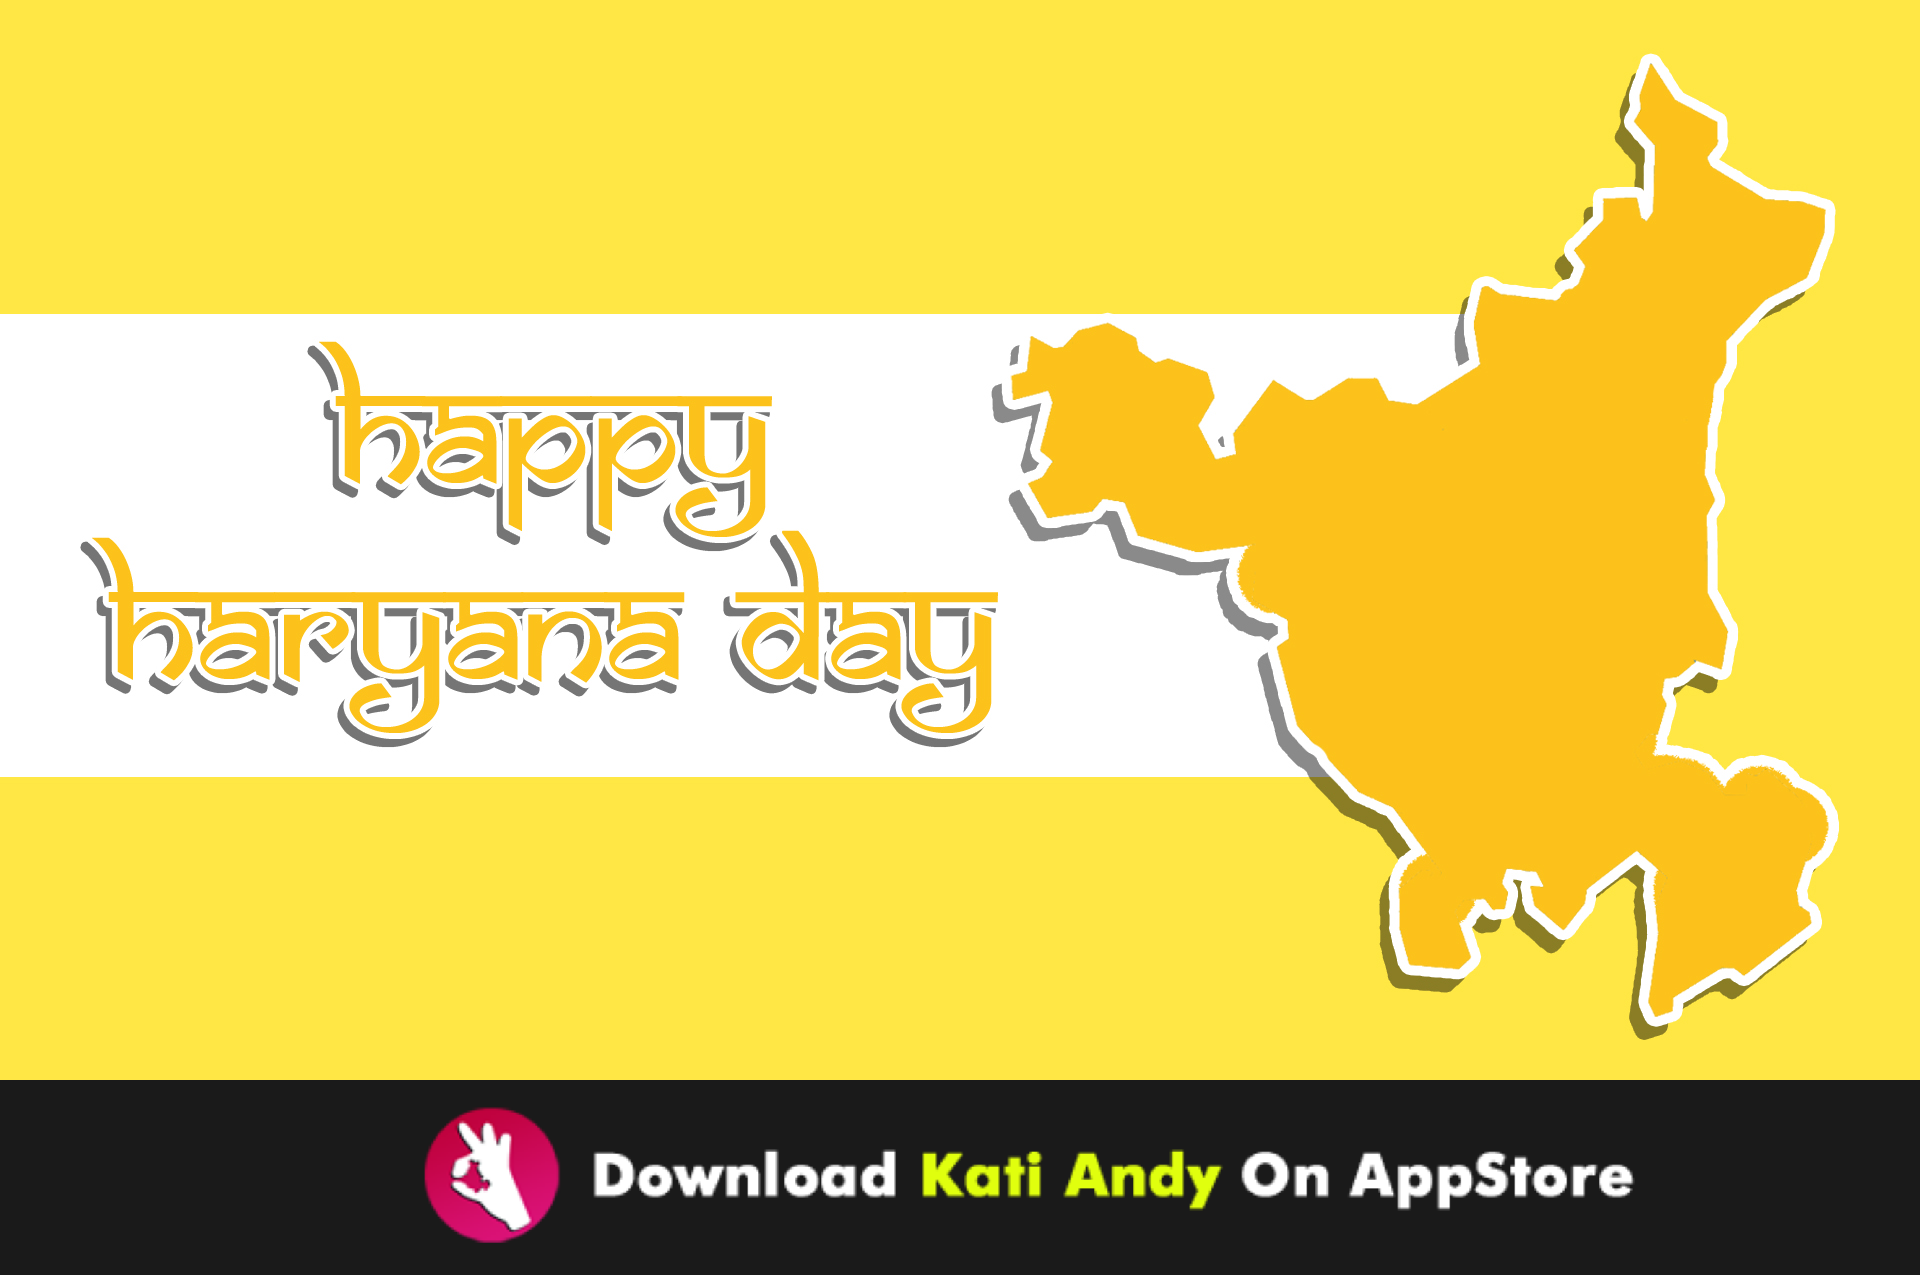 Happy Haryana Day DP, Image & Wallpapers - Haryanvi Image : Wallpapers,  Jokes, SMS, Gallery, Videos, Music, Slideshows, Latest News